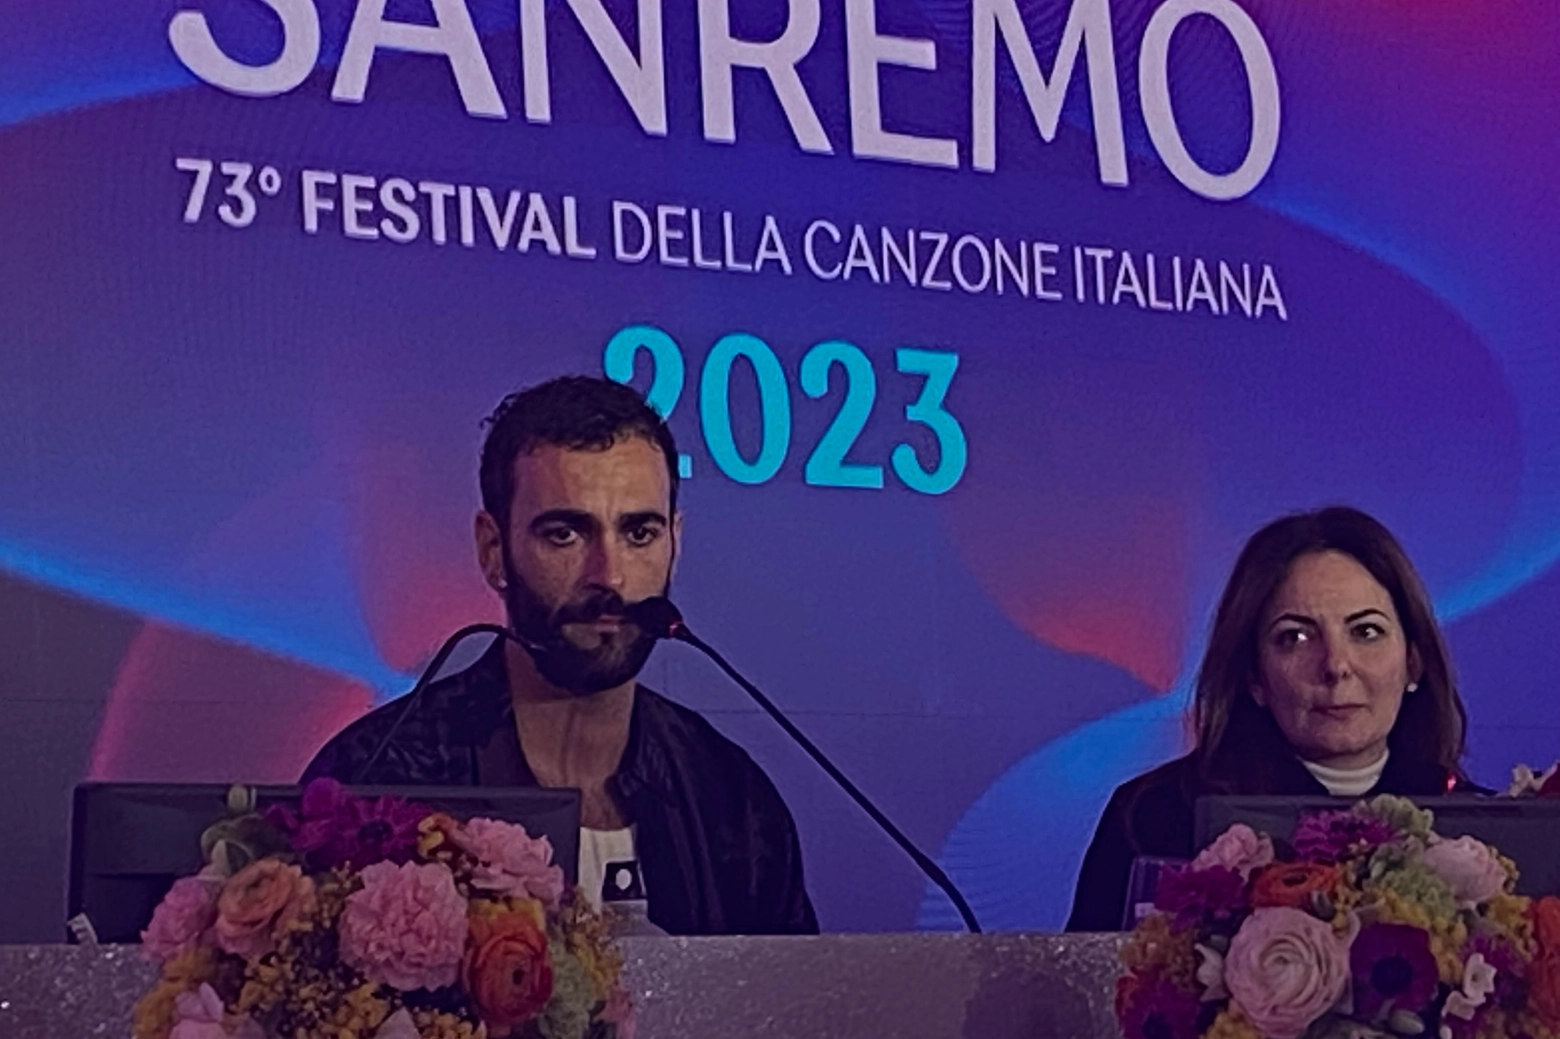 Marco Mengoni in sala stampa a Sanremo 2023